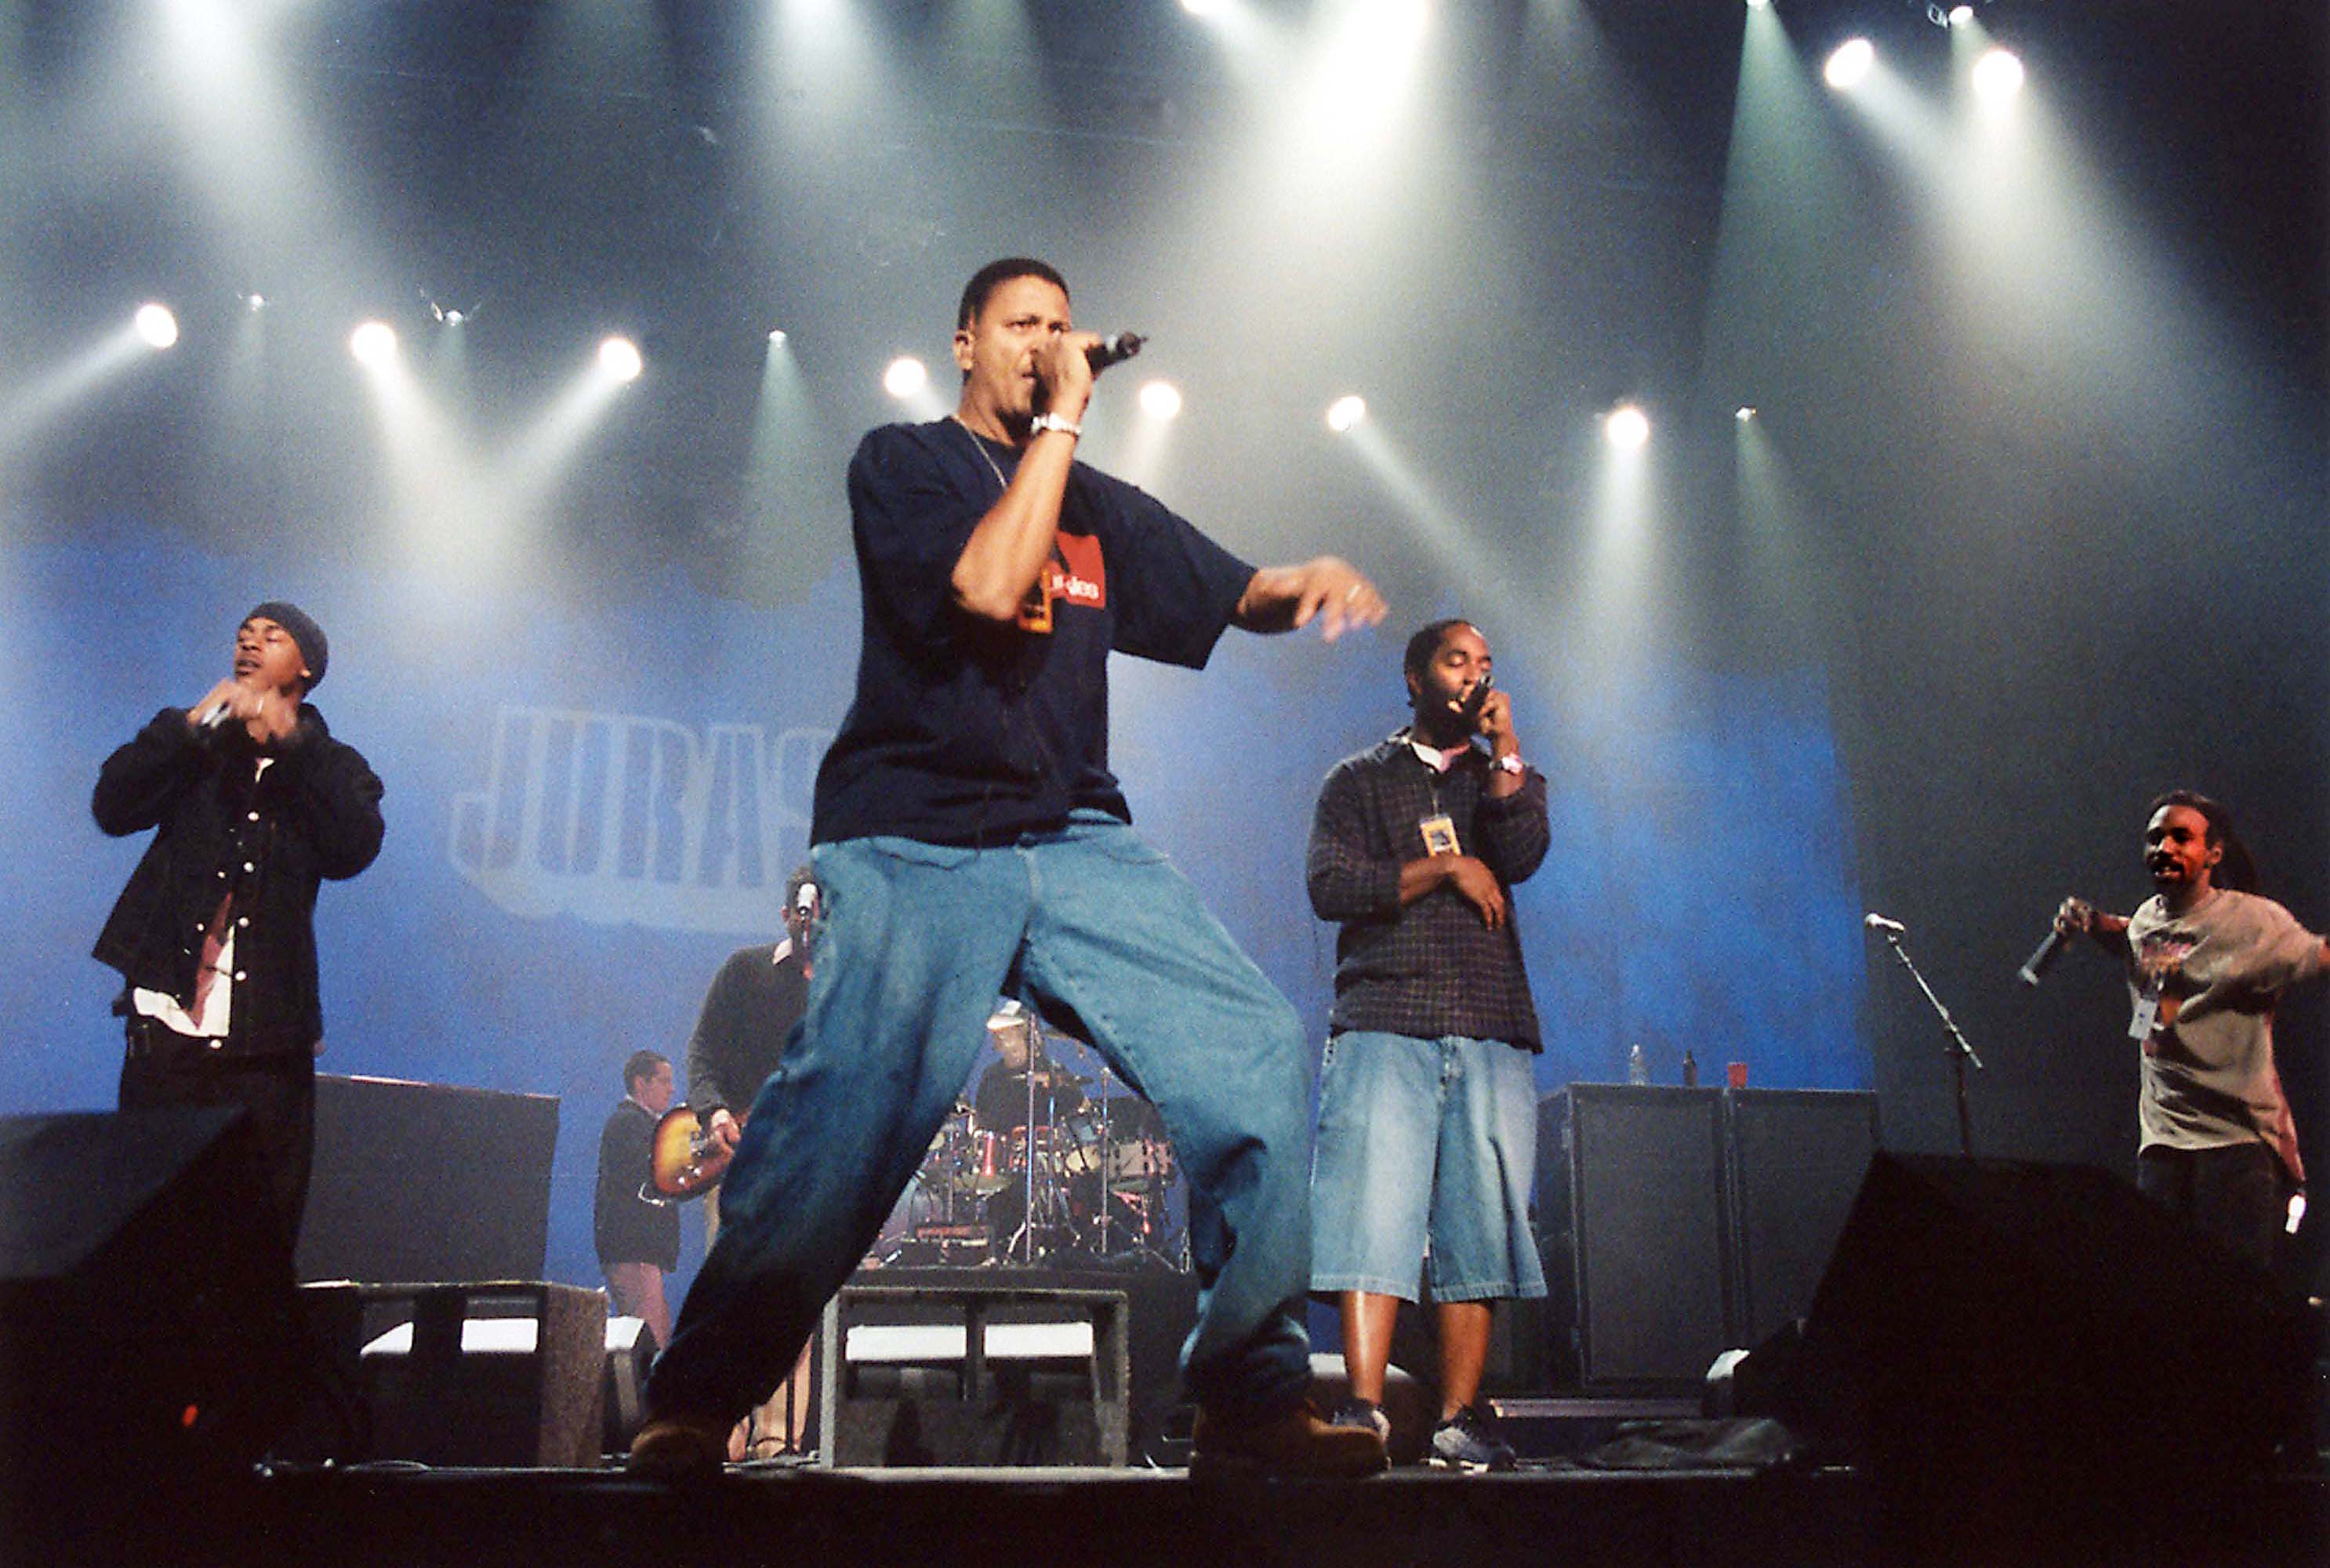 Great Expectations: An Oral History of Jurassic 5's <i></noscript>
<h2></h2>
<h2><strong>Reception</strong></h2>
<p> </p>
<p><strong>Dan Dalton:</strong> There was a lot of pressure on whether or not we were going to change. That I remember. We answered the calling and nobody bailed. Nobody thought we sold out. We were still Jurassic 5, just with better distribution and a better team.</p>
<p><strong>Cut Chemist:</strong> We wanted to do it our way and this was the result, which were better results than most people get from doing it your way on a major record label. I think we may be the shining example, the best-case scenario, of having your cake and kind of eating it, too. The machine got behind it and we had 100% creative control. Usually, when you have 100% creative control they’re like, “Fuck this record,” and they’re not going to work it.</p>
<p><strong>Soup:</strong> It was a slow burn. It didn’t take off. And at that time, first week sales was a big thing. We didn’t place high, but we didn’t place low. I’m looking at Billboard right now. We went to 43 and R&B/hip hop albums we were at 33. We were above 50. It would have been dope if we were like 10 or something, but that wasn’t bad… We just wanted to come out. We didn’t know nothing about first-week sales and we didn’t care anything about that. That was for the record label to worry about.</p>
<p><strong>Cut Chemist:</strong> The weird thing about the success of “Quality Control” is that I could feel the machine behind it. I was like, “This isn’t an organic thing.” It’s not the kind of song that is cracking on the mainstream. Yet it was on mainstream platforms. On Power 106 or 92.3 had “Quality Control” going up against Jay-Z songs. And it was winning. I was like, “What?!” We were on some MTV show. It was on some <i>TRL-type</i> shit. Girls were dancing to “Quality Control” when we were up there performing and I was like, “This is surreal. This is weird. You guys don’t normally dance to shit that sounds like this.” It was cool, but it was so different from what was going on at the time.</p>
<p><strong>B+:</strong> There’s a lot of Good Lifers out there that would be delighted to point out to you that both Snoop Dogg and Bone Thugs-N-Harmony came through. But as far as groups that were concerned with the core tenets of The Good Life, I think it’s a fair point to be made that Jurassic had the most successful career.</p>
<p><strong>Marc 7:</strong> We’re still seeing residuals from the record to this day, so it’s doing alright. We were so busy. We toured for years. There’s not many groups that can go silent, go dark for five or six years and come back and just tour like nothing ever happened. We’re one of those groups that can do that.</p>
</p></p>    <div class=